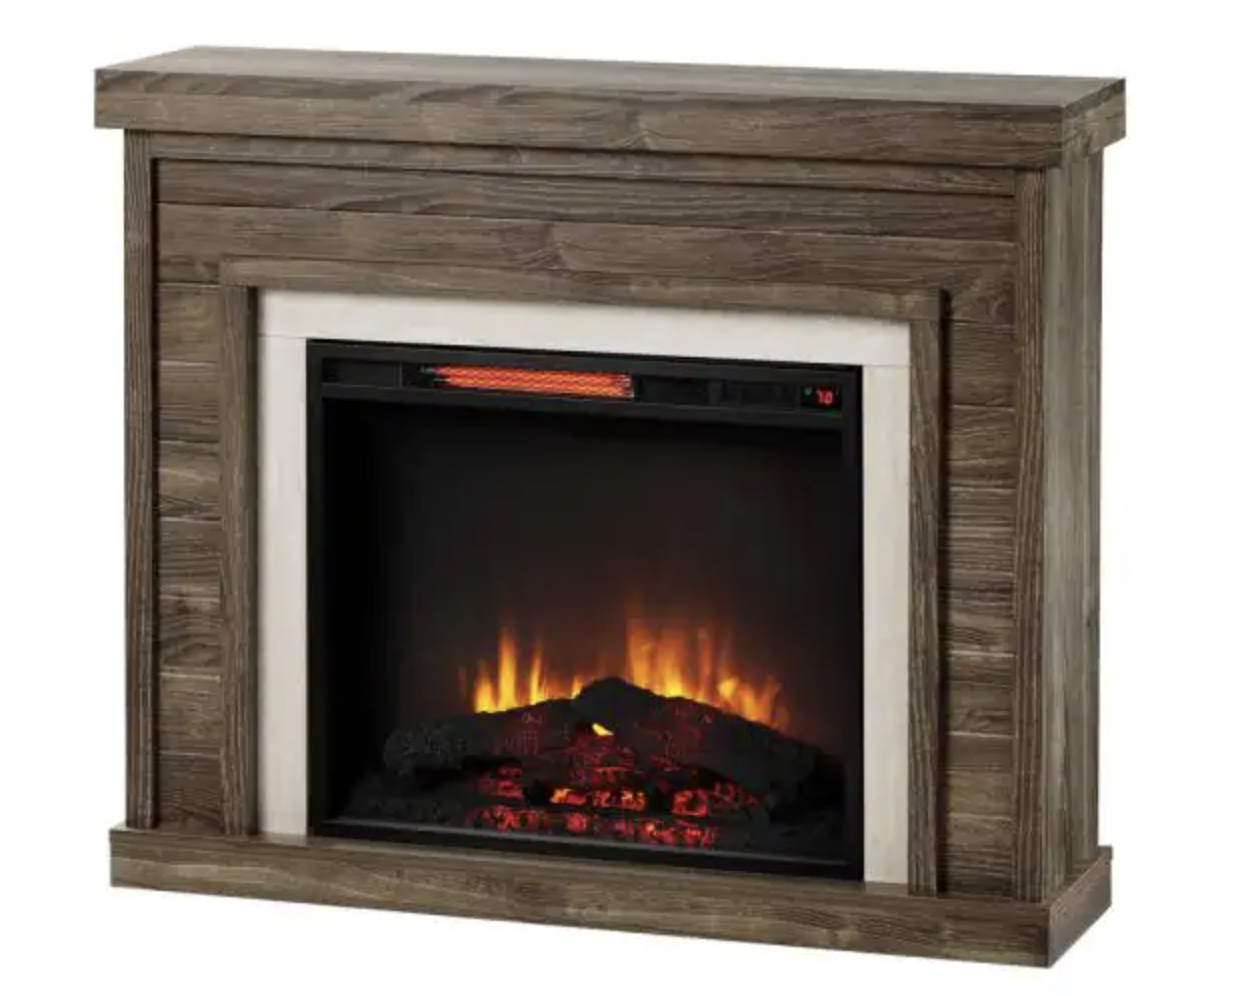 Grafton Freestanding Electric Fireplace! At Home Depot!